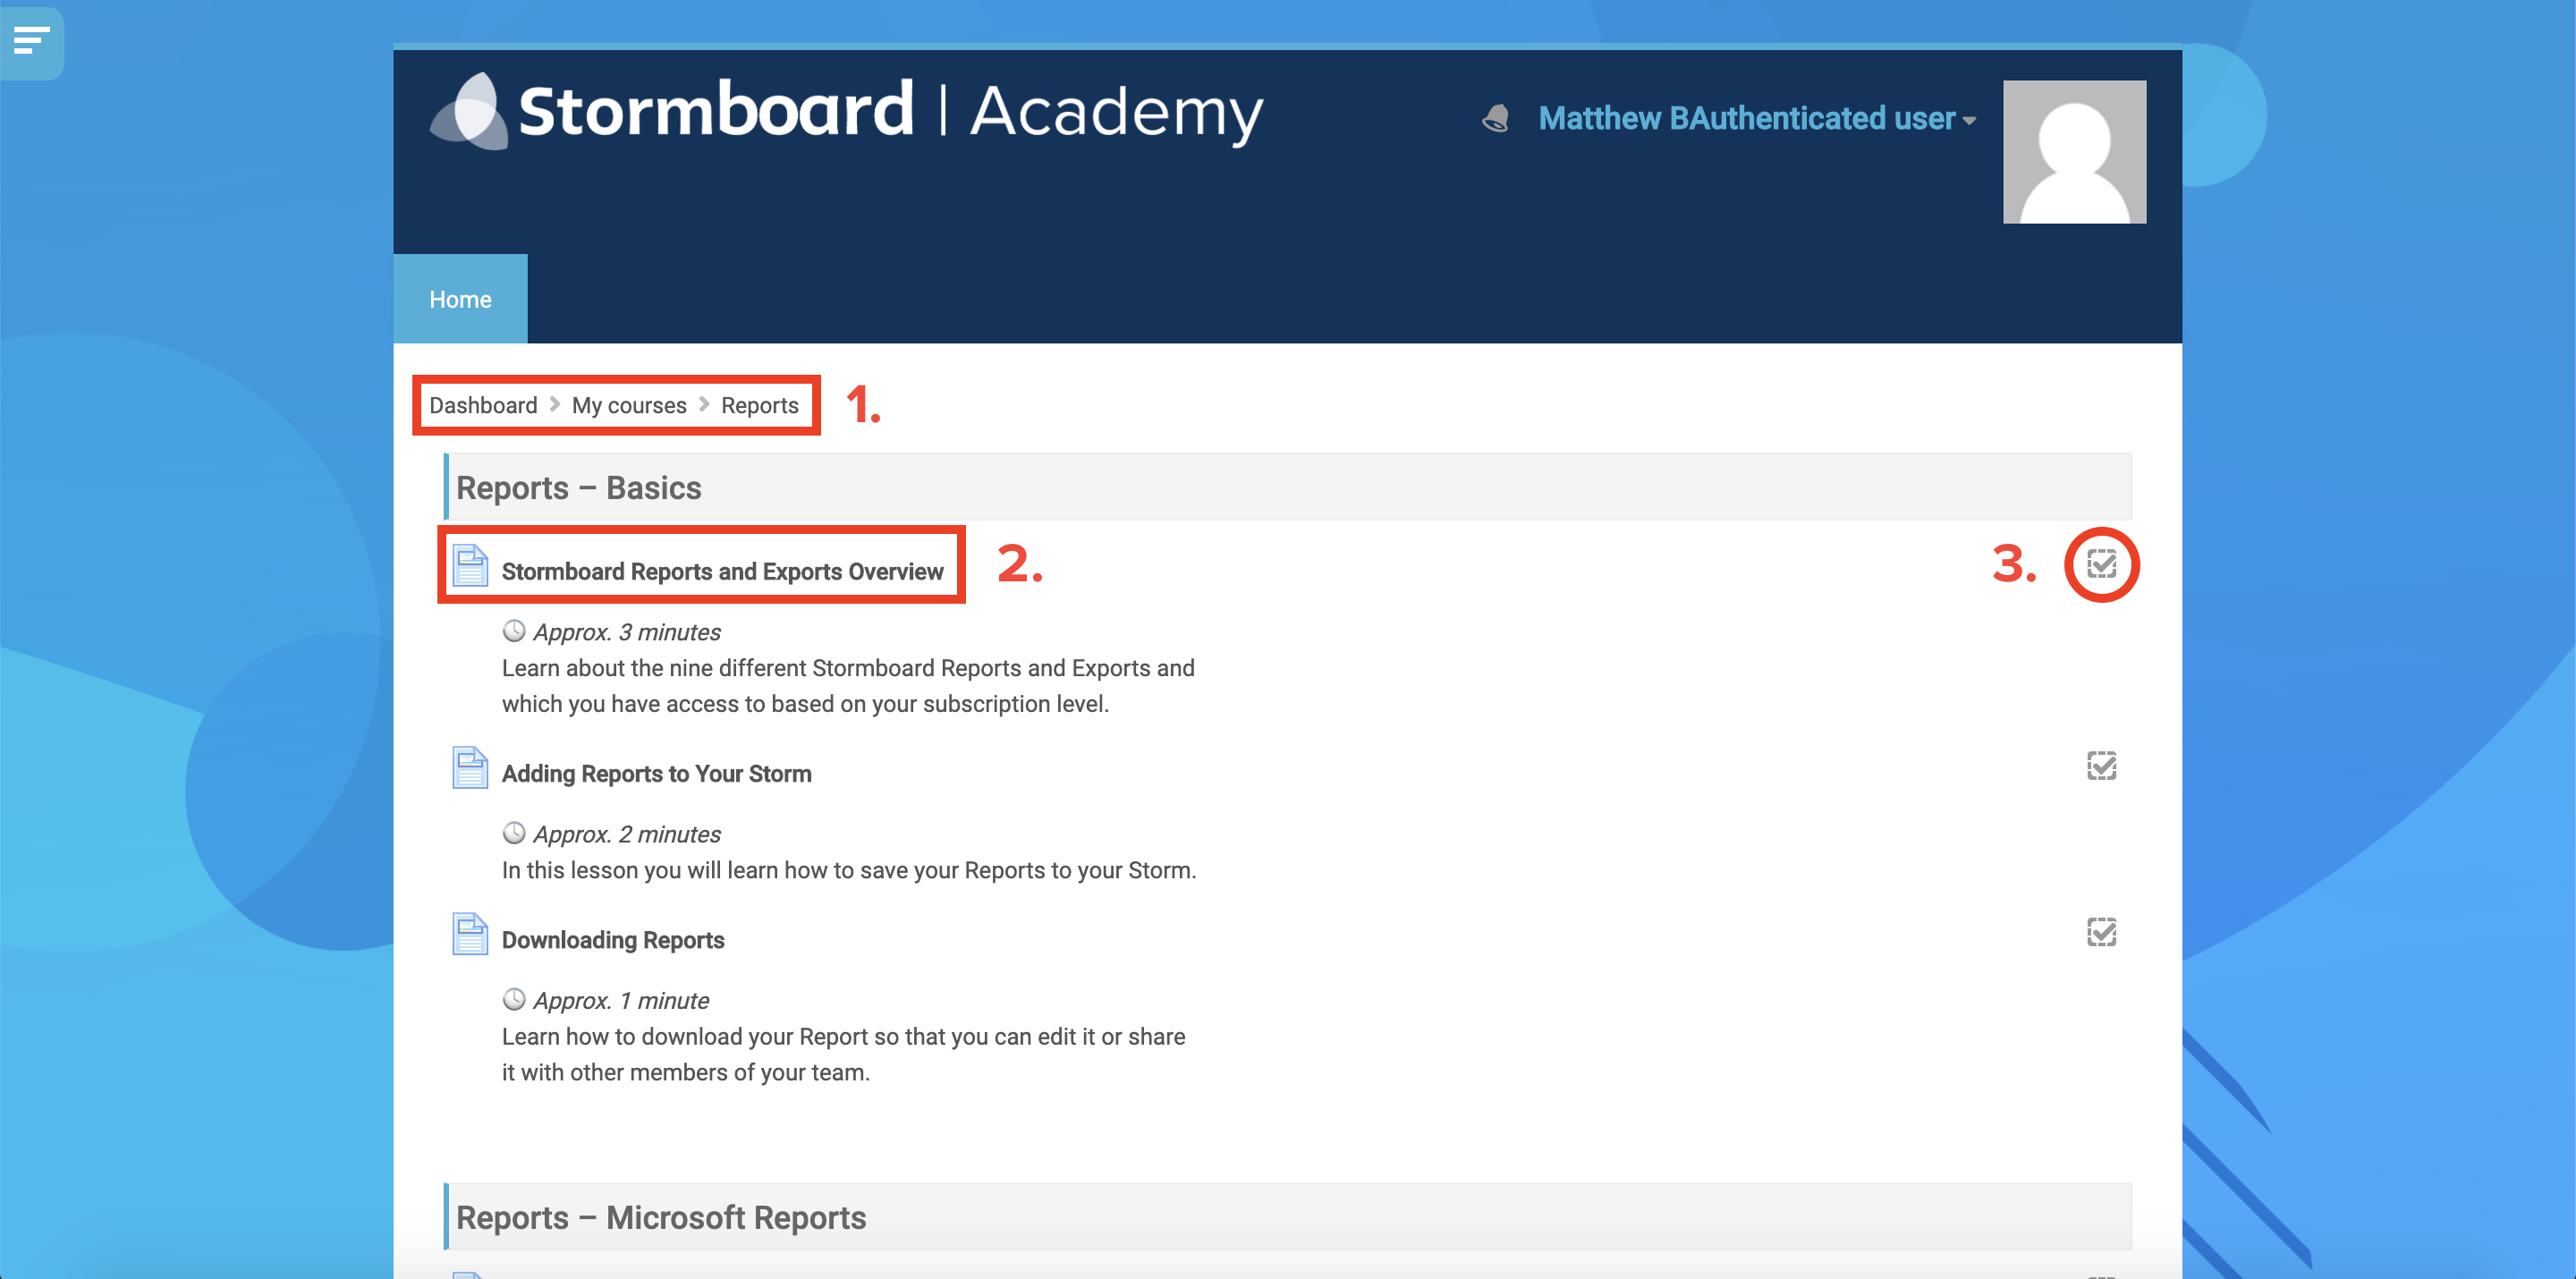 Stormboard Academy course view